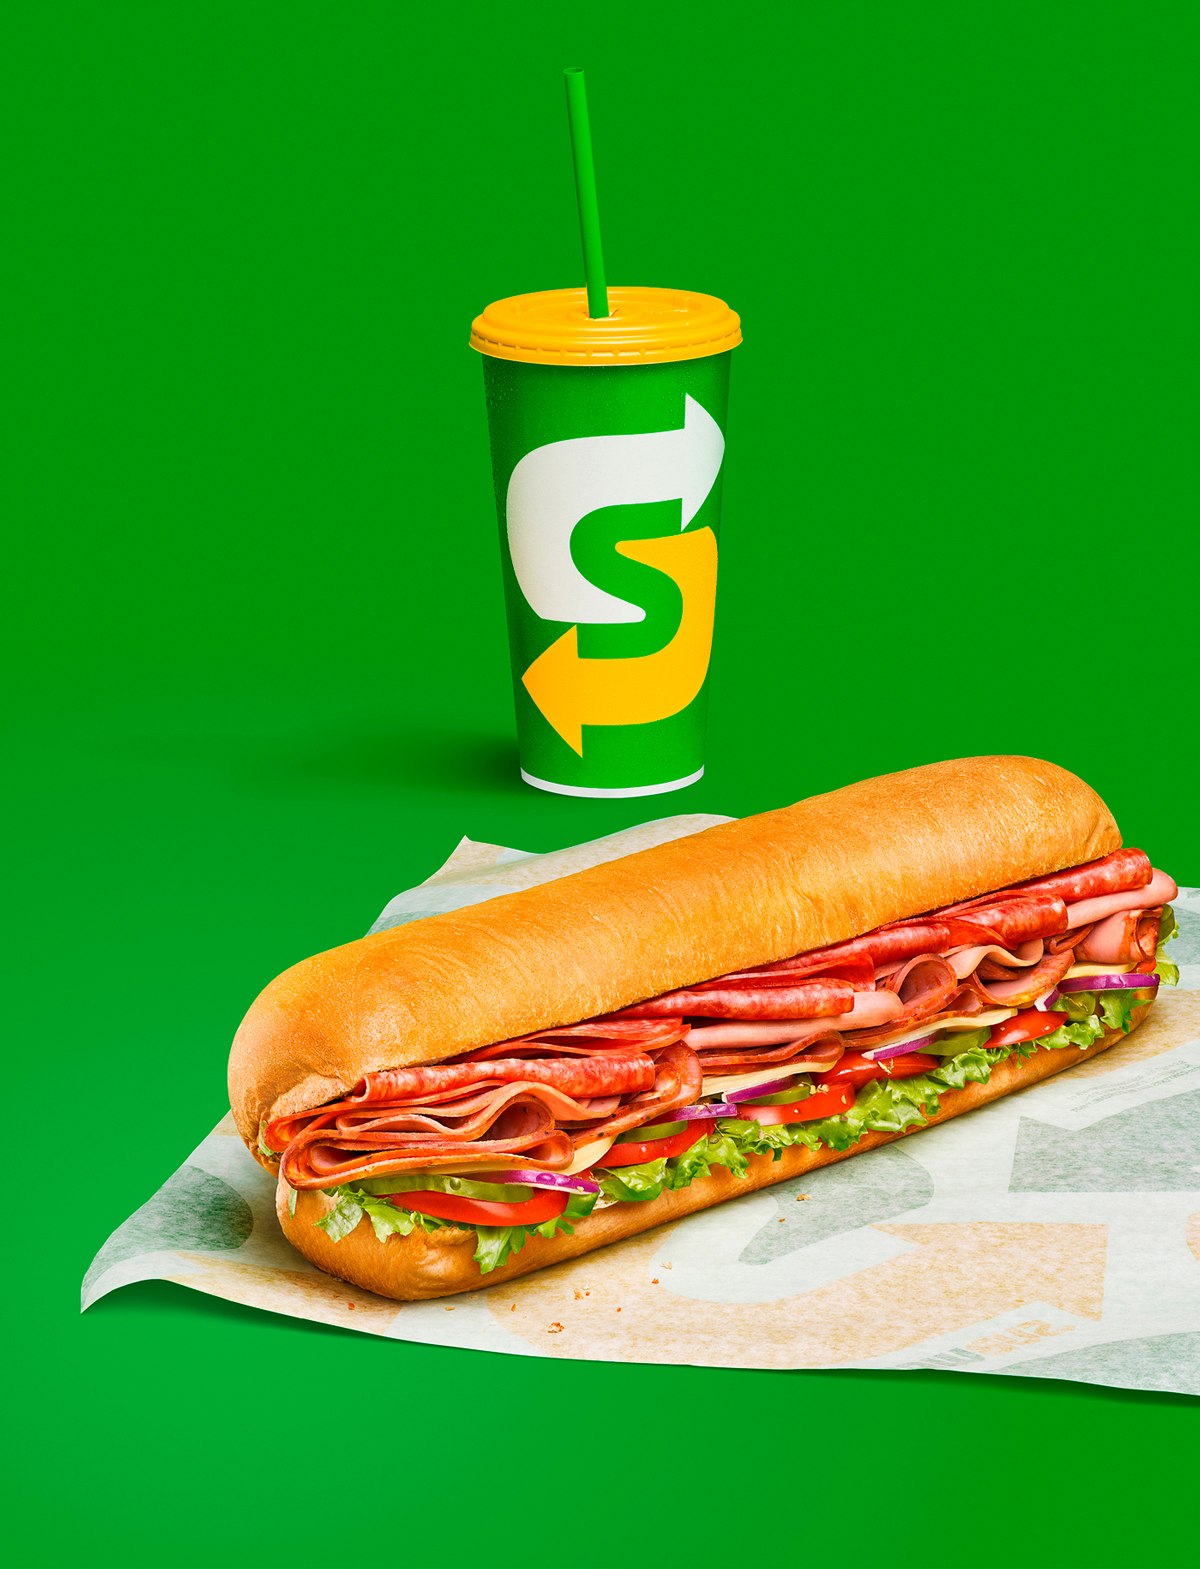 A subway sandwich and drink against a green background.